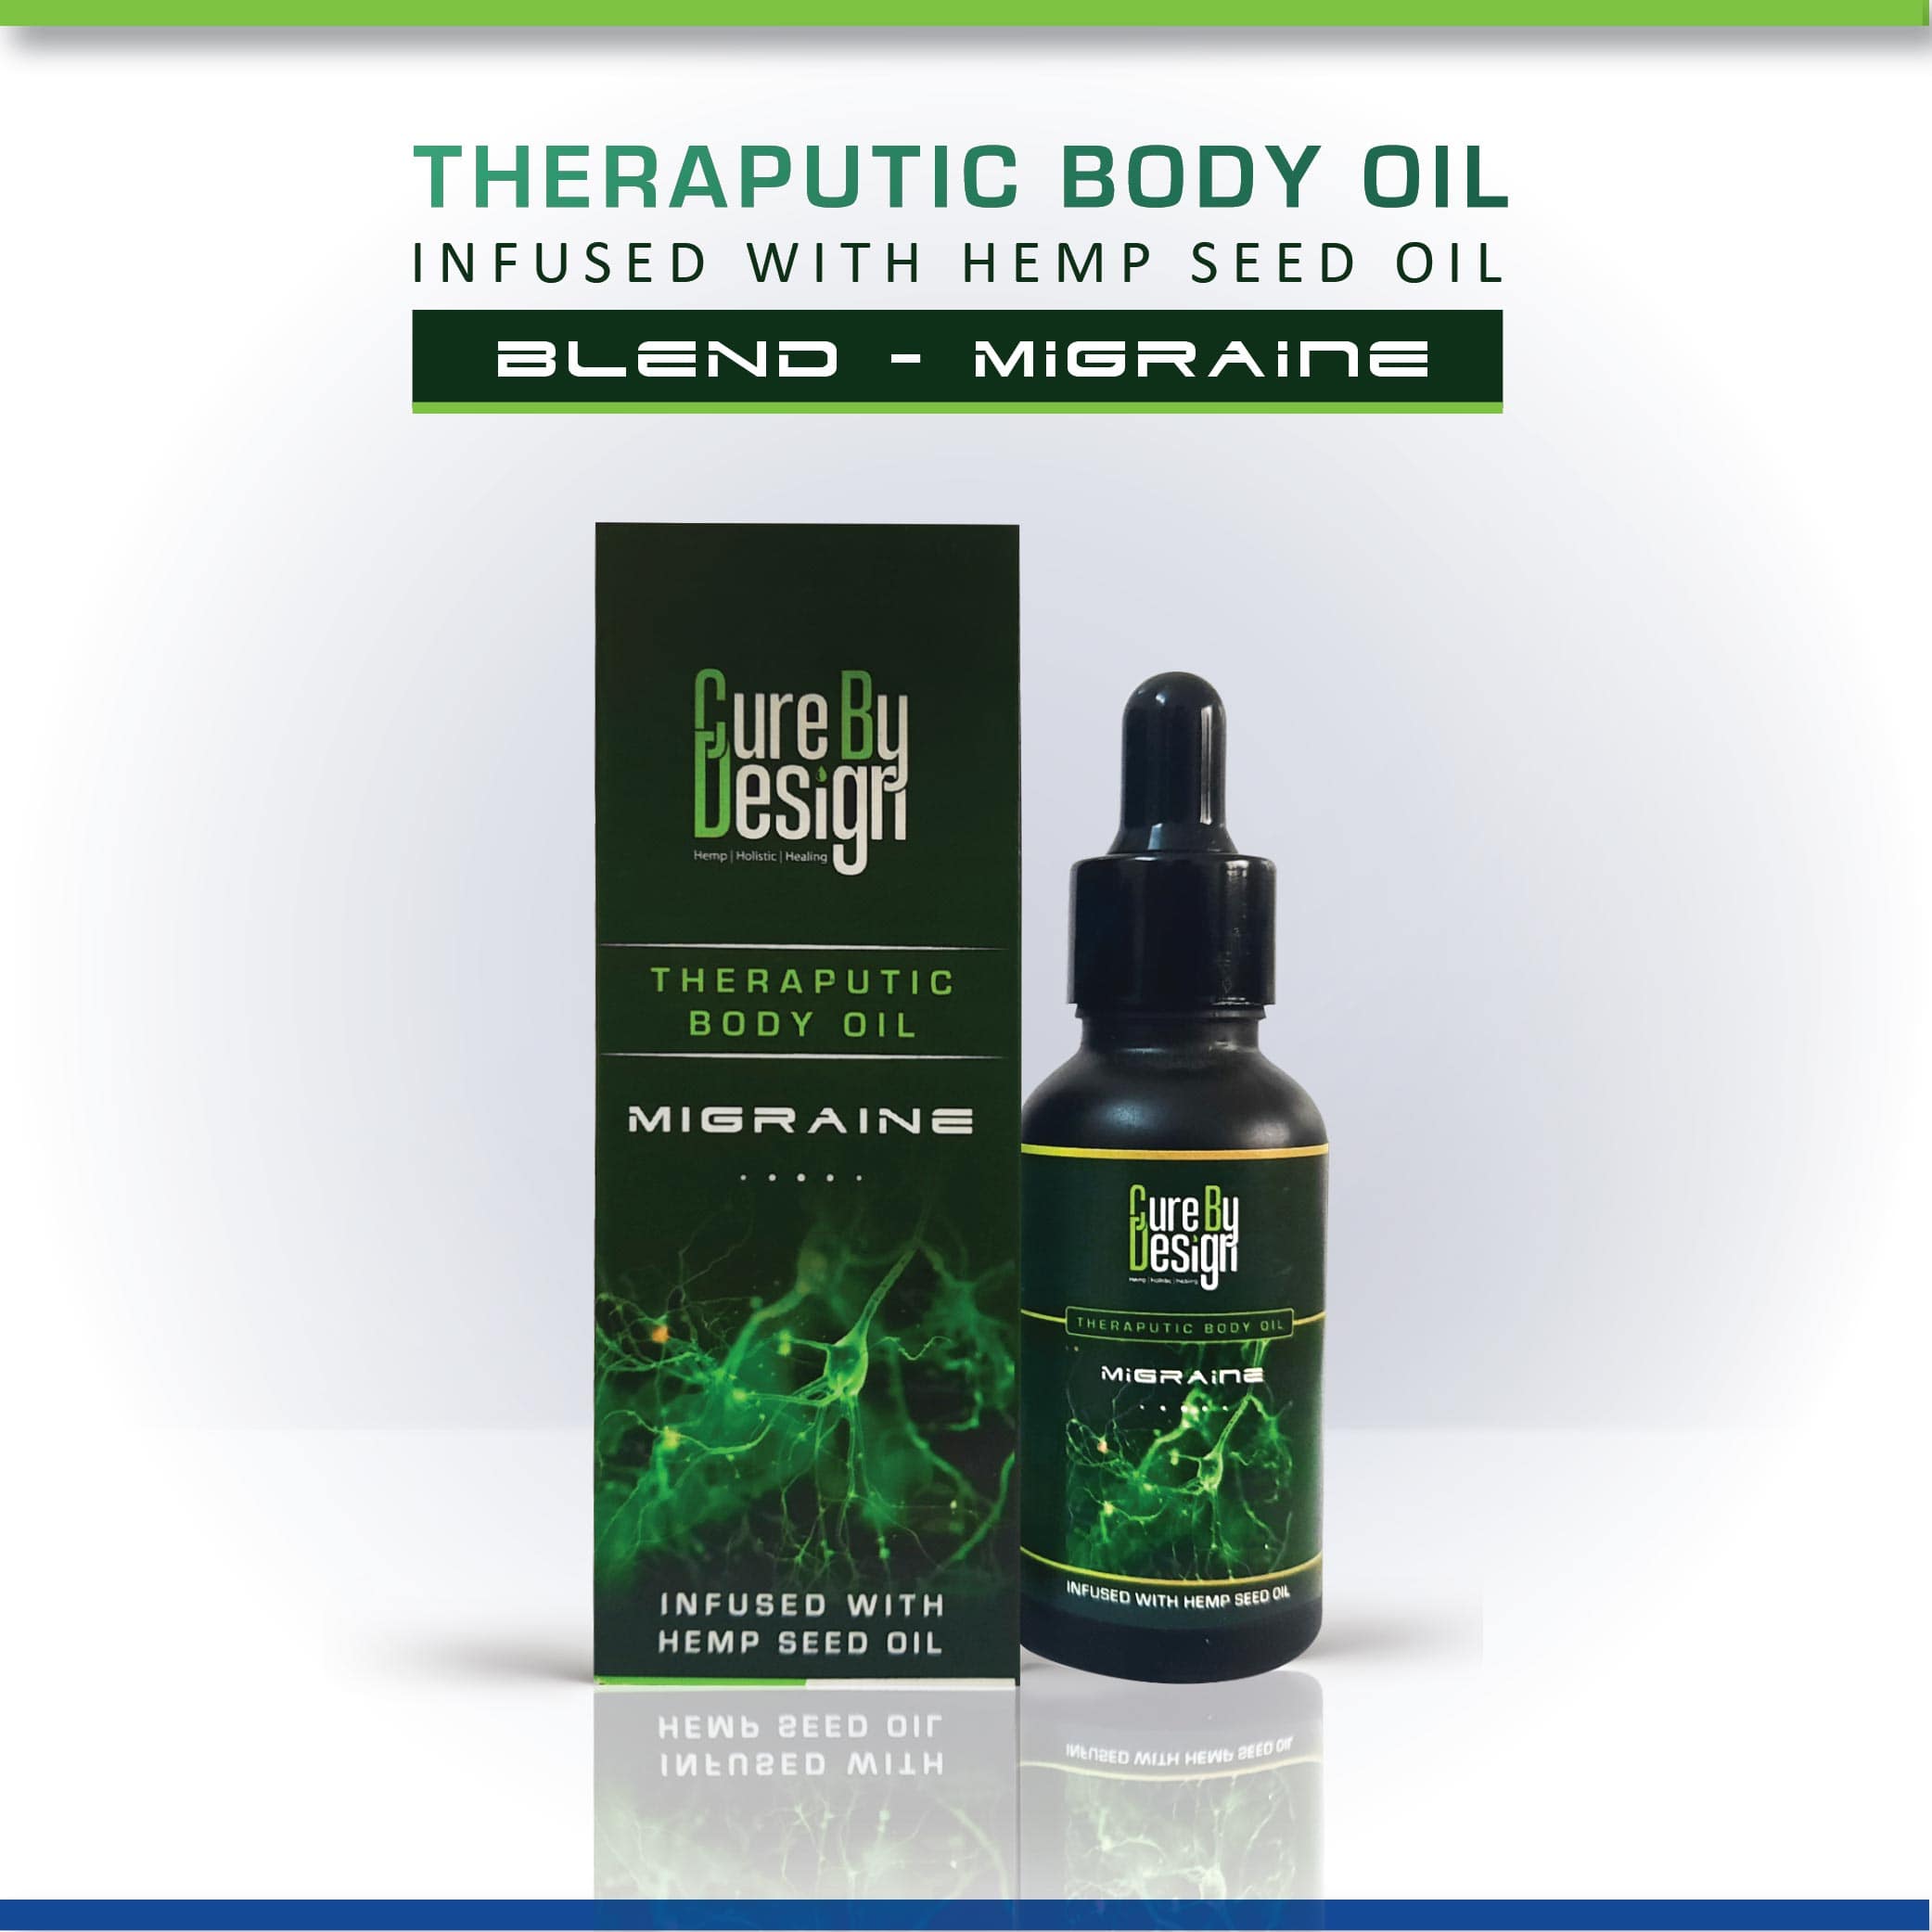 Cure By Design Theraputic Body Oil Infused with Hemp Seed Oil for Migrane